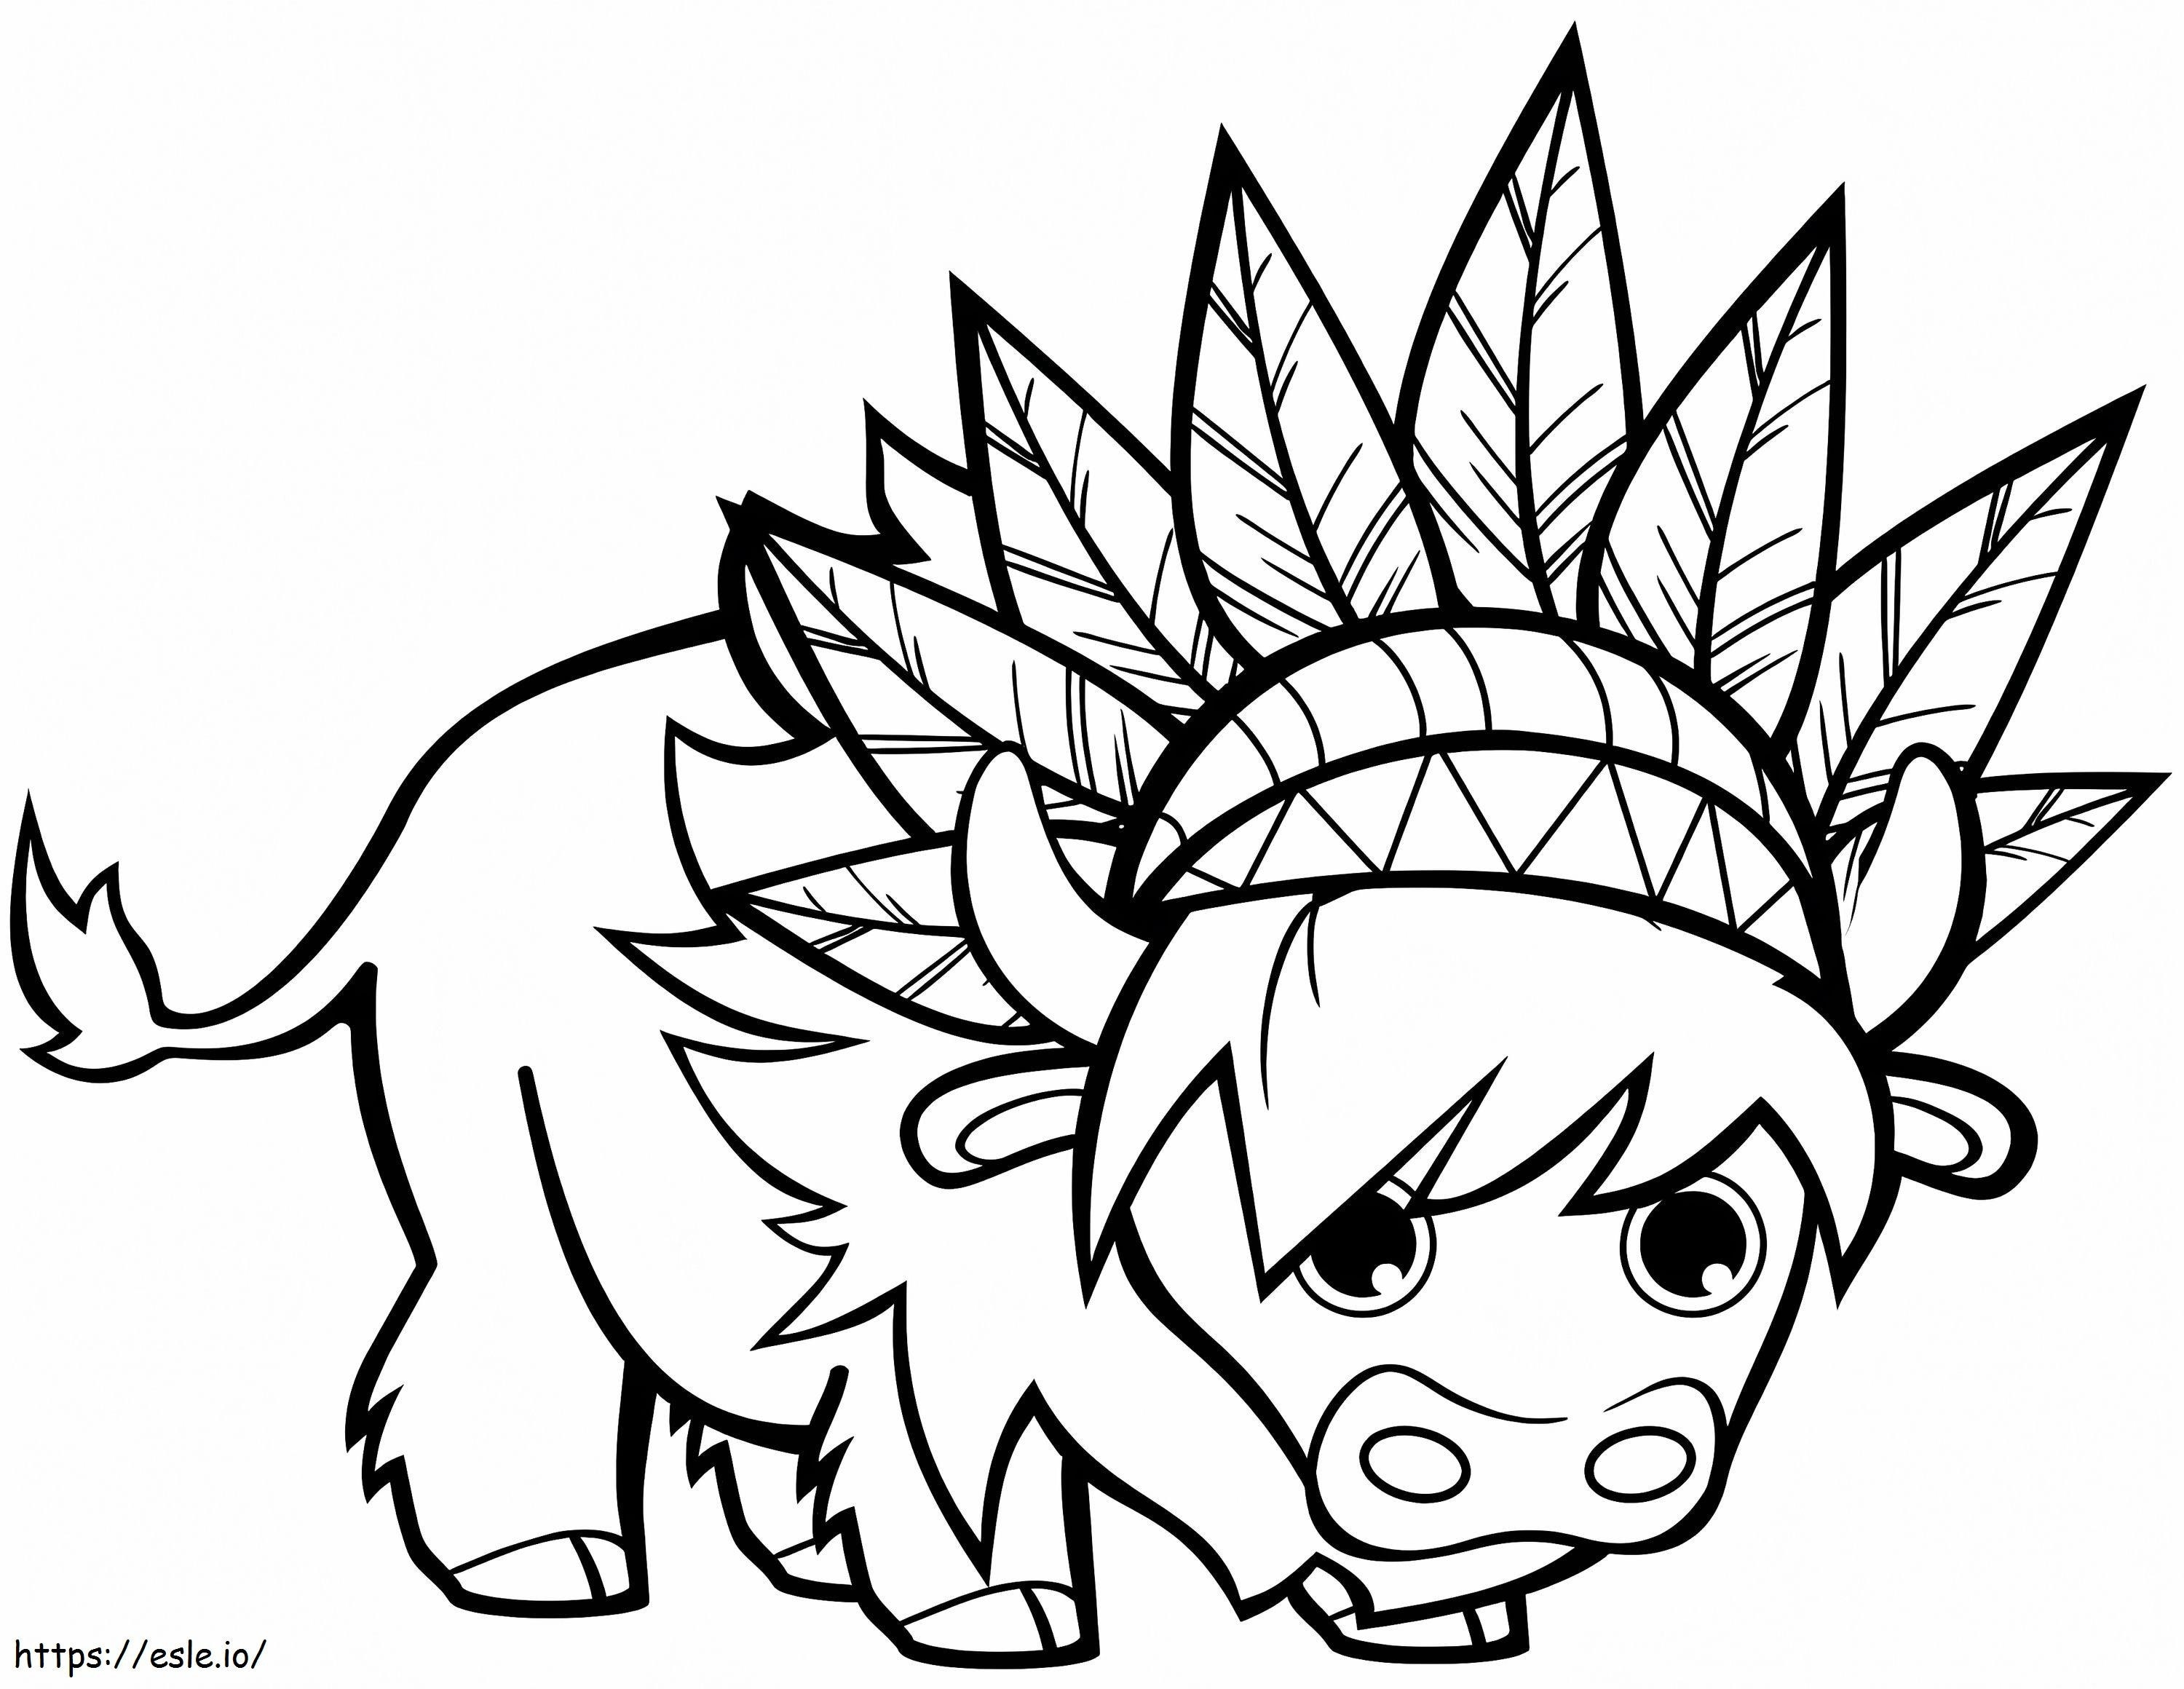 Funny Bison coloring page